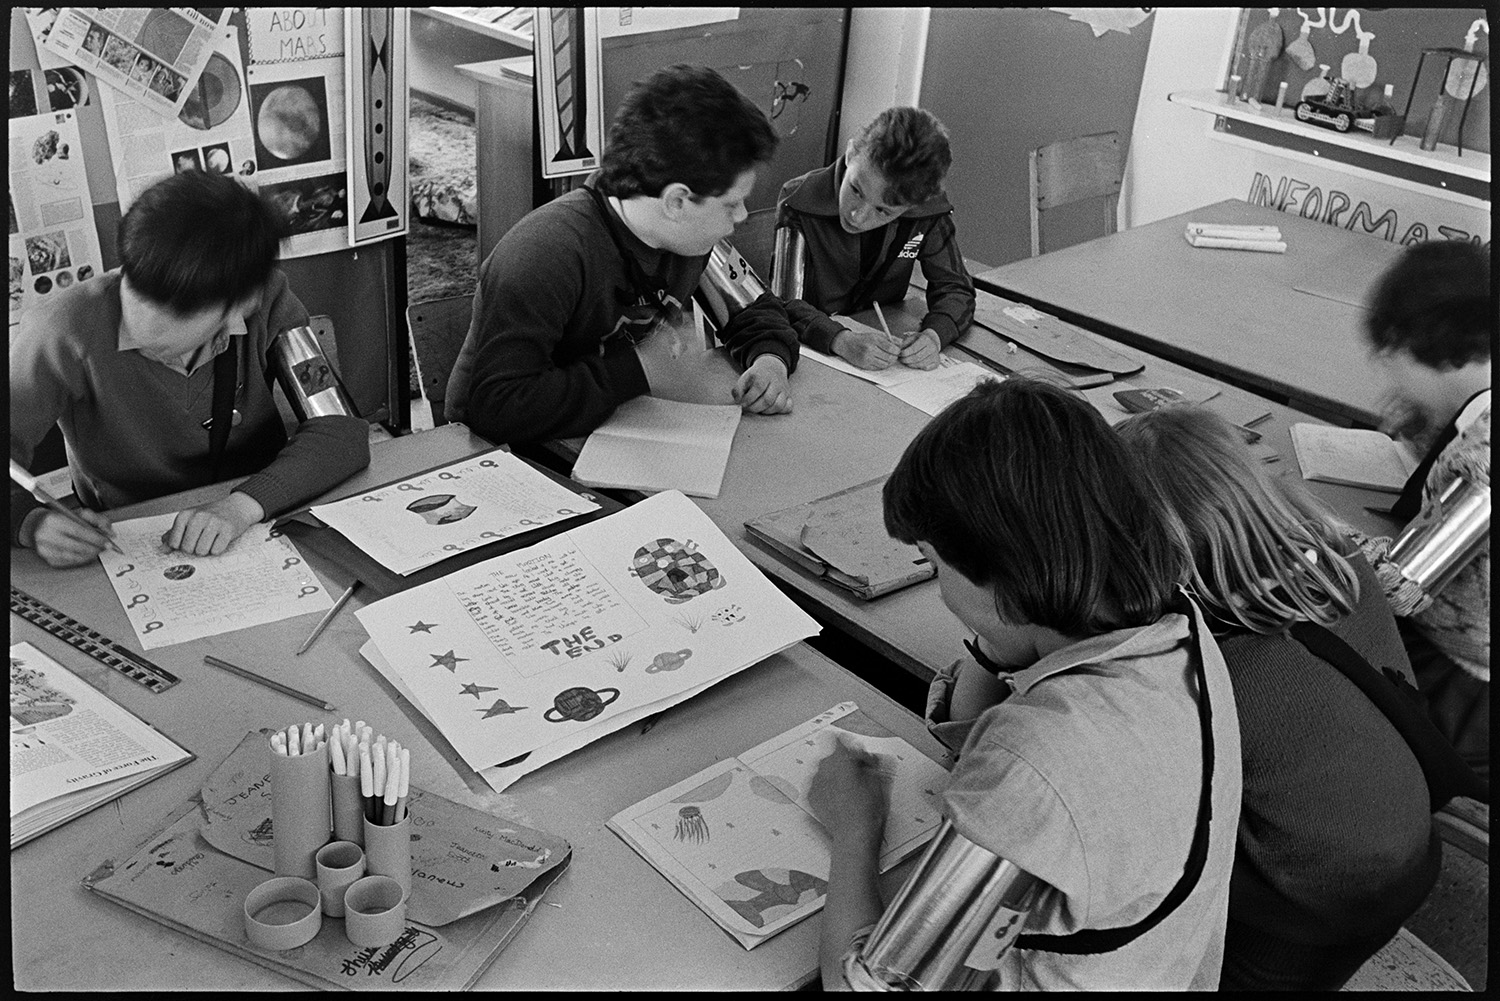 Schoolchildren working on space project pretending to be astronauts. 
[Boys and girls drawing designs for a space project in a classroom at Bideford Primary School. They are all wearing arm bands.]